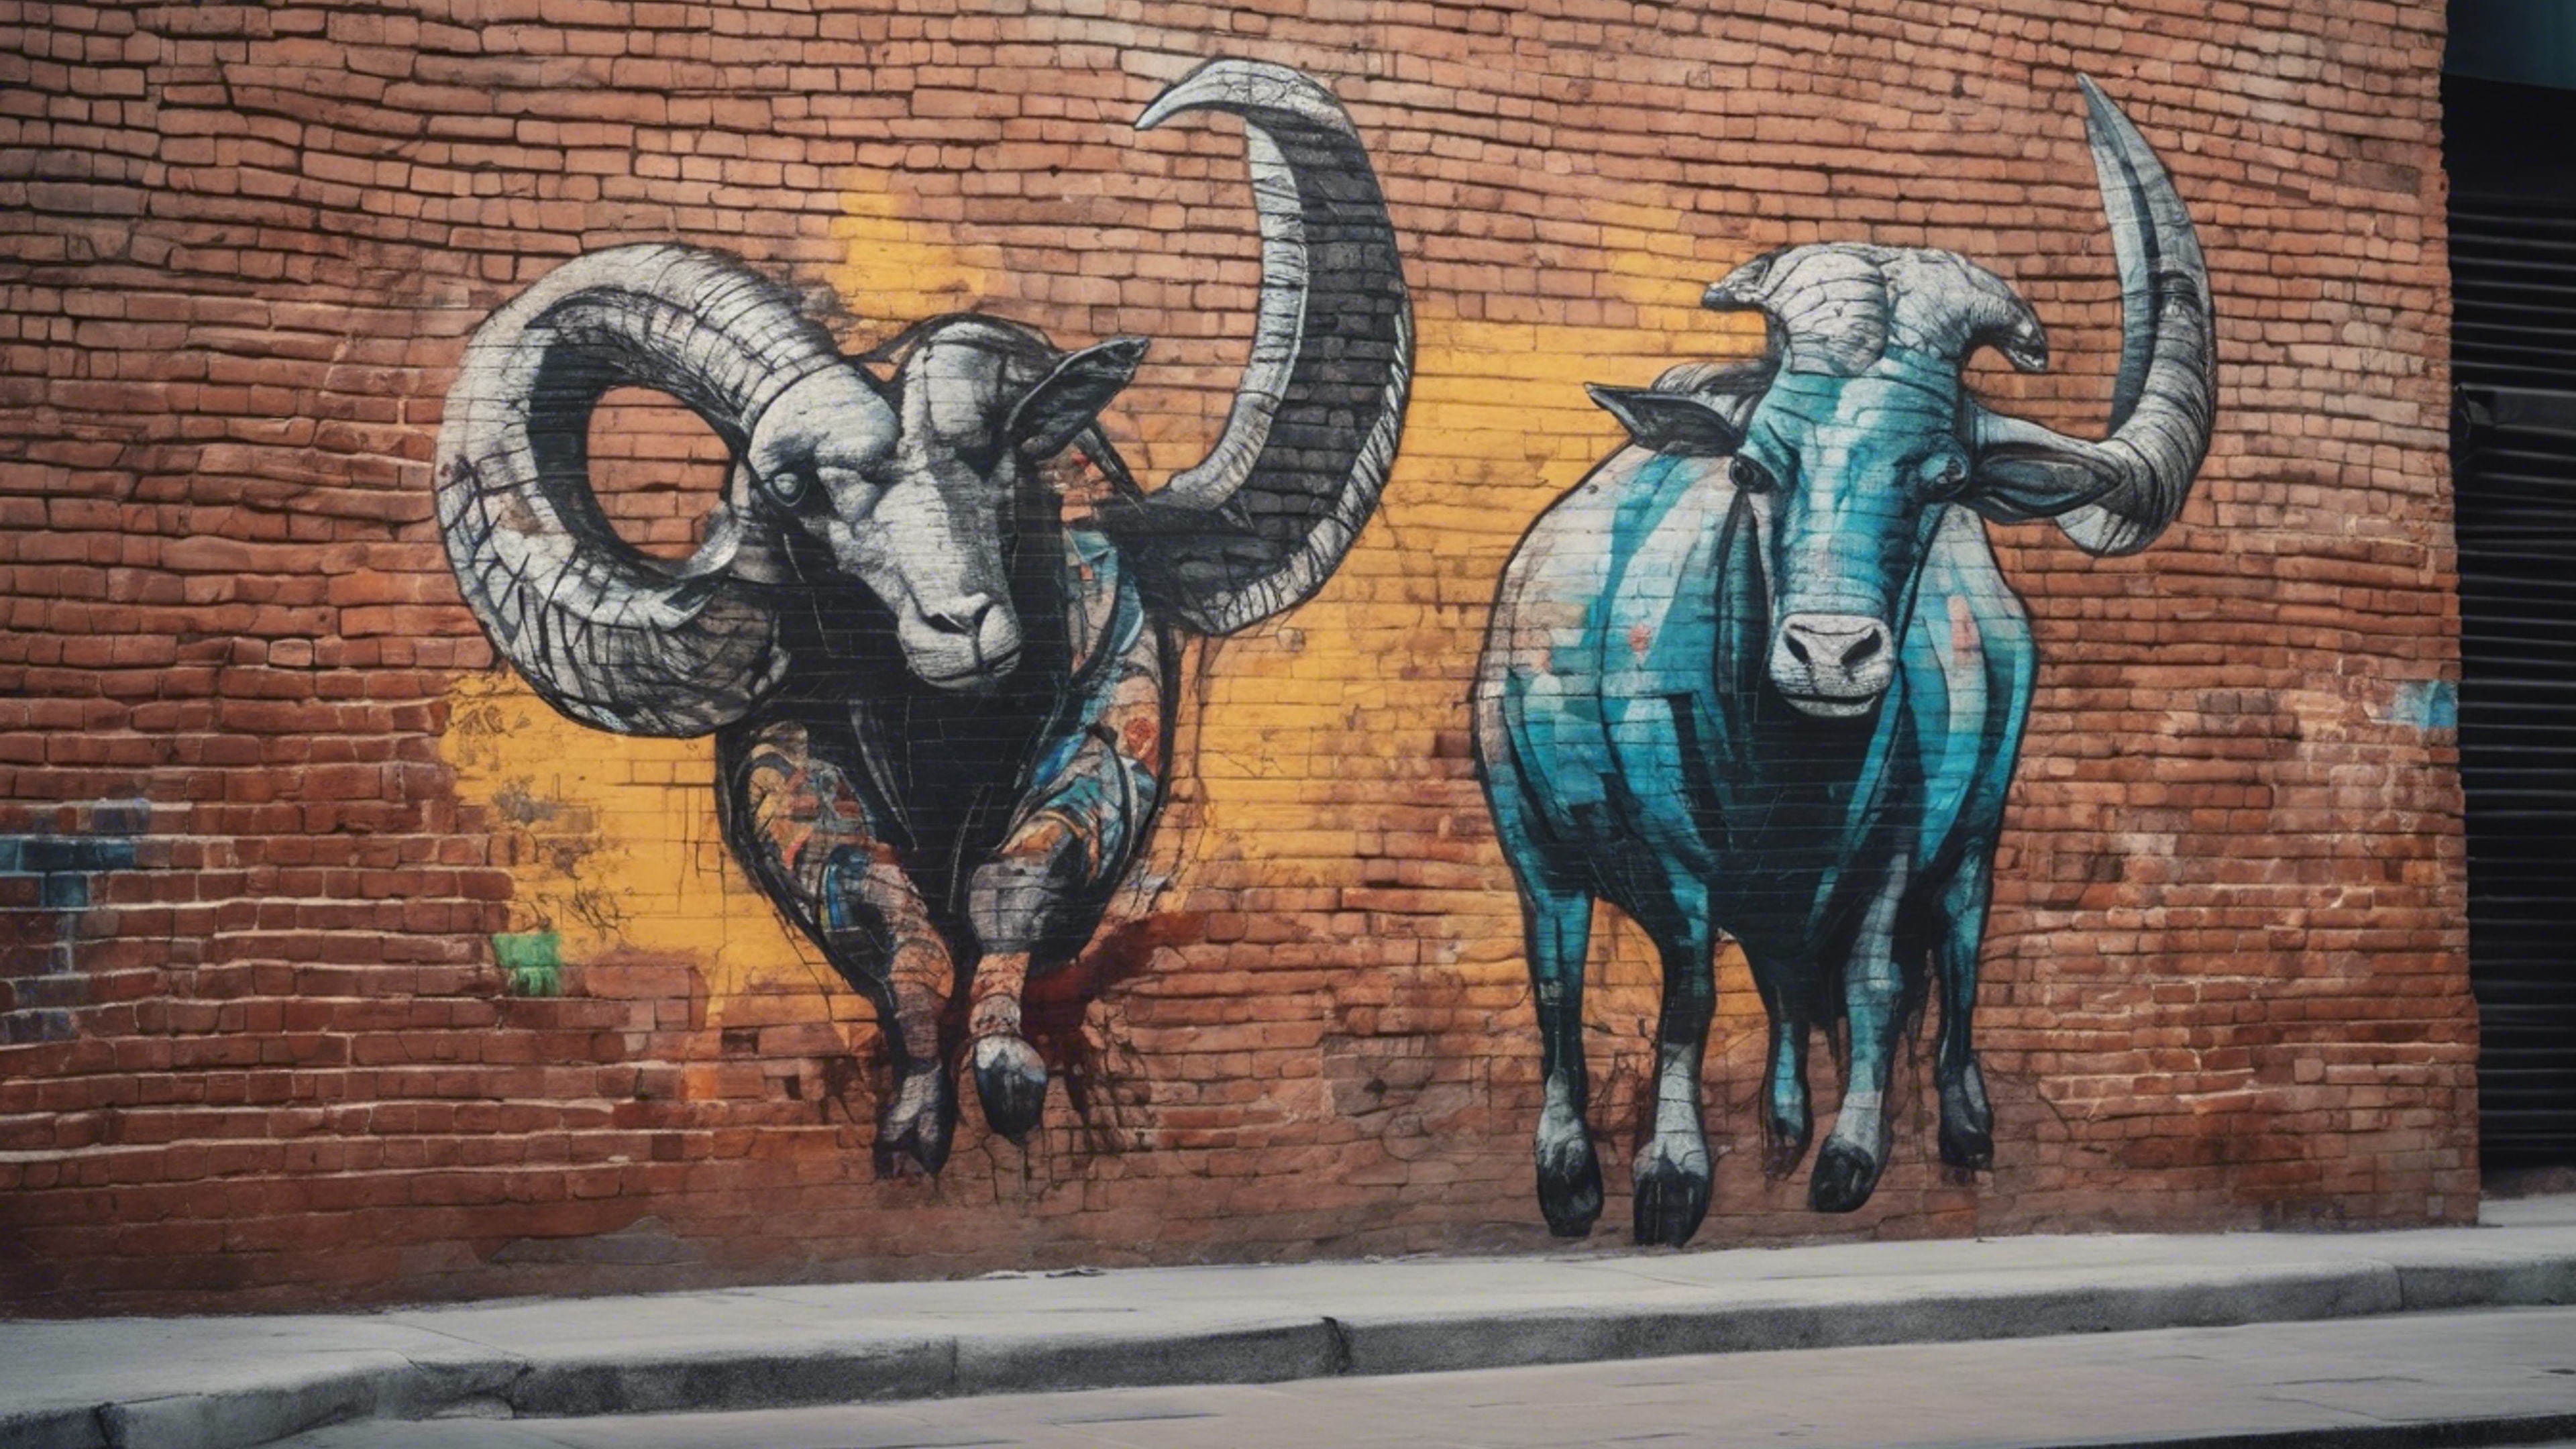 A Capricorn painted as street art on a brick wall in a busy city street.壁紙[8124c45194ee4830b5c7]